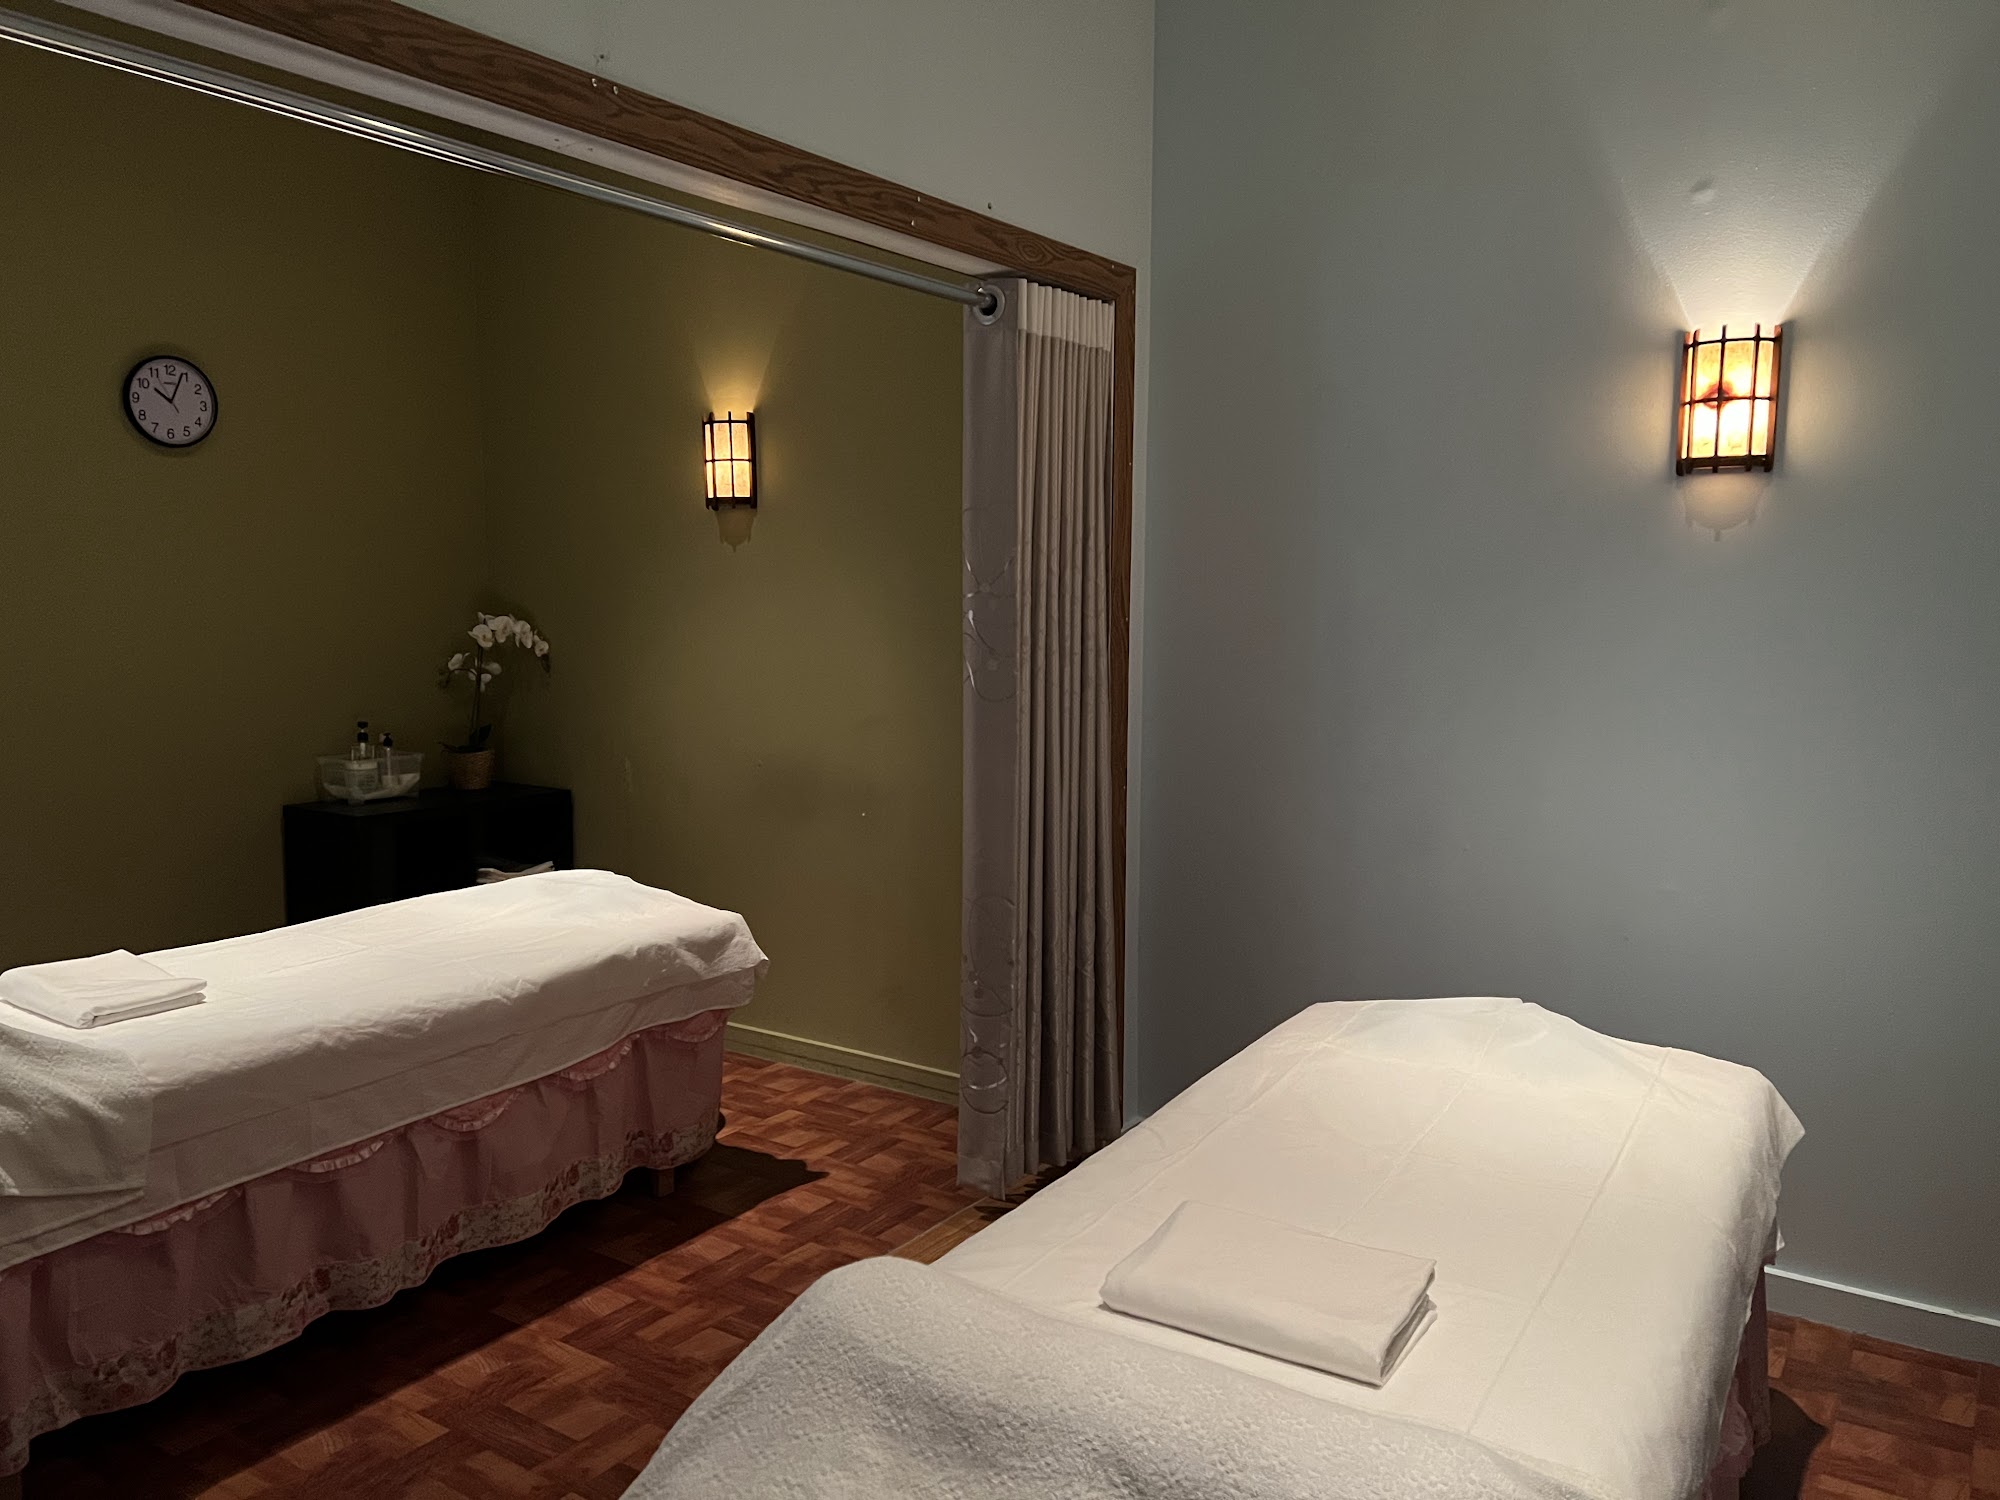 Tranquil Times SPA. Foot & bodywork 142 Broadway, Hillsdale New Jersey 07642